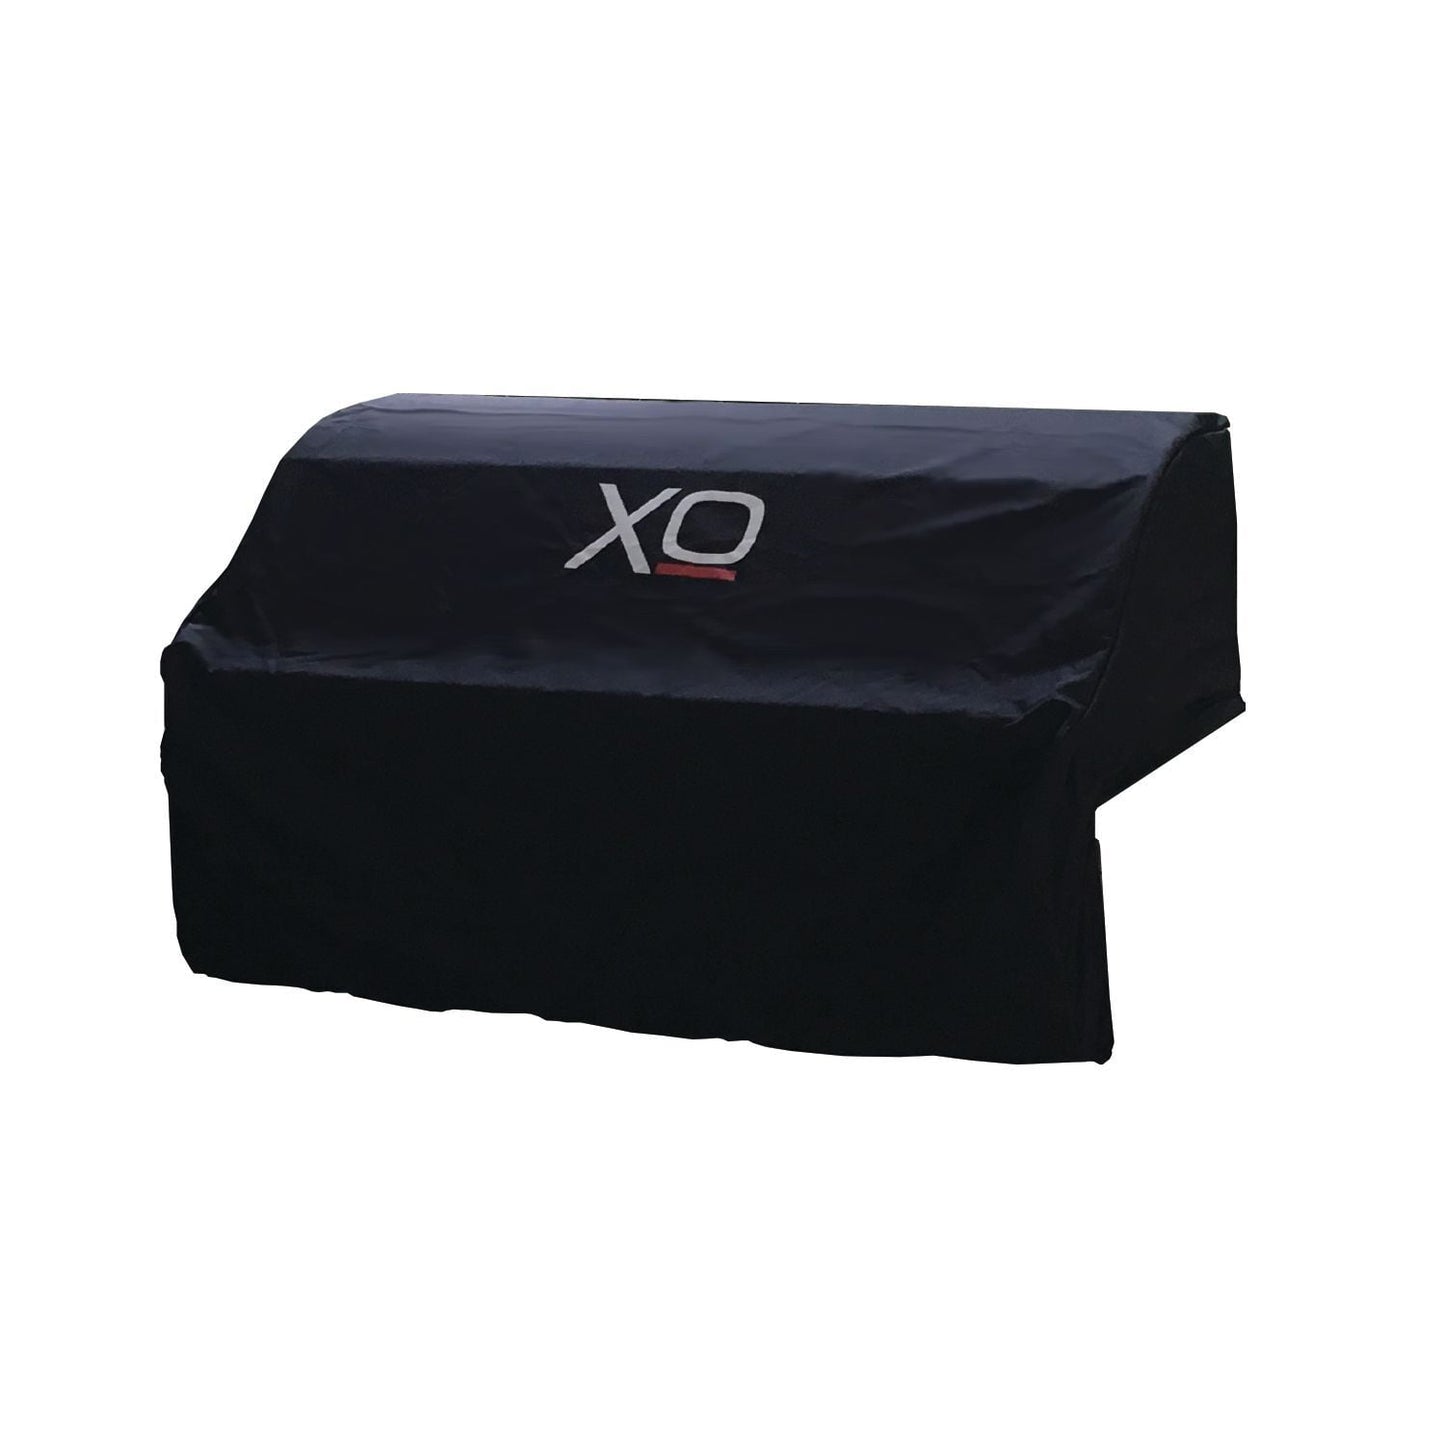 Xo Appliance XOGCOVER30BI All Weather Cover For 30" Built-In Grill